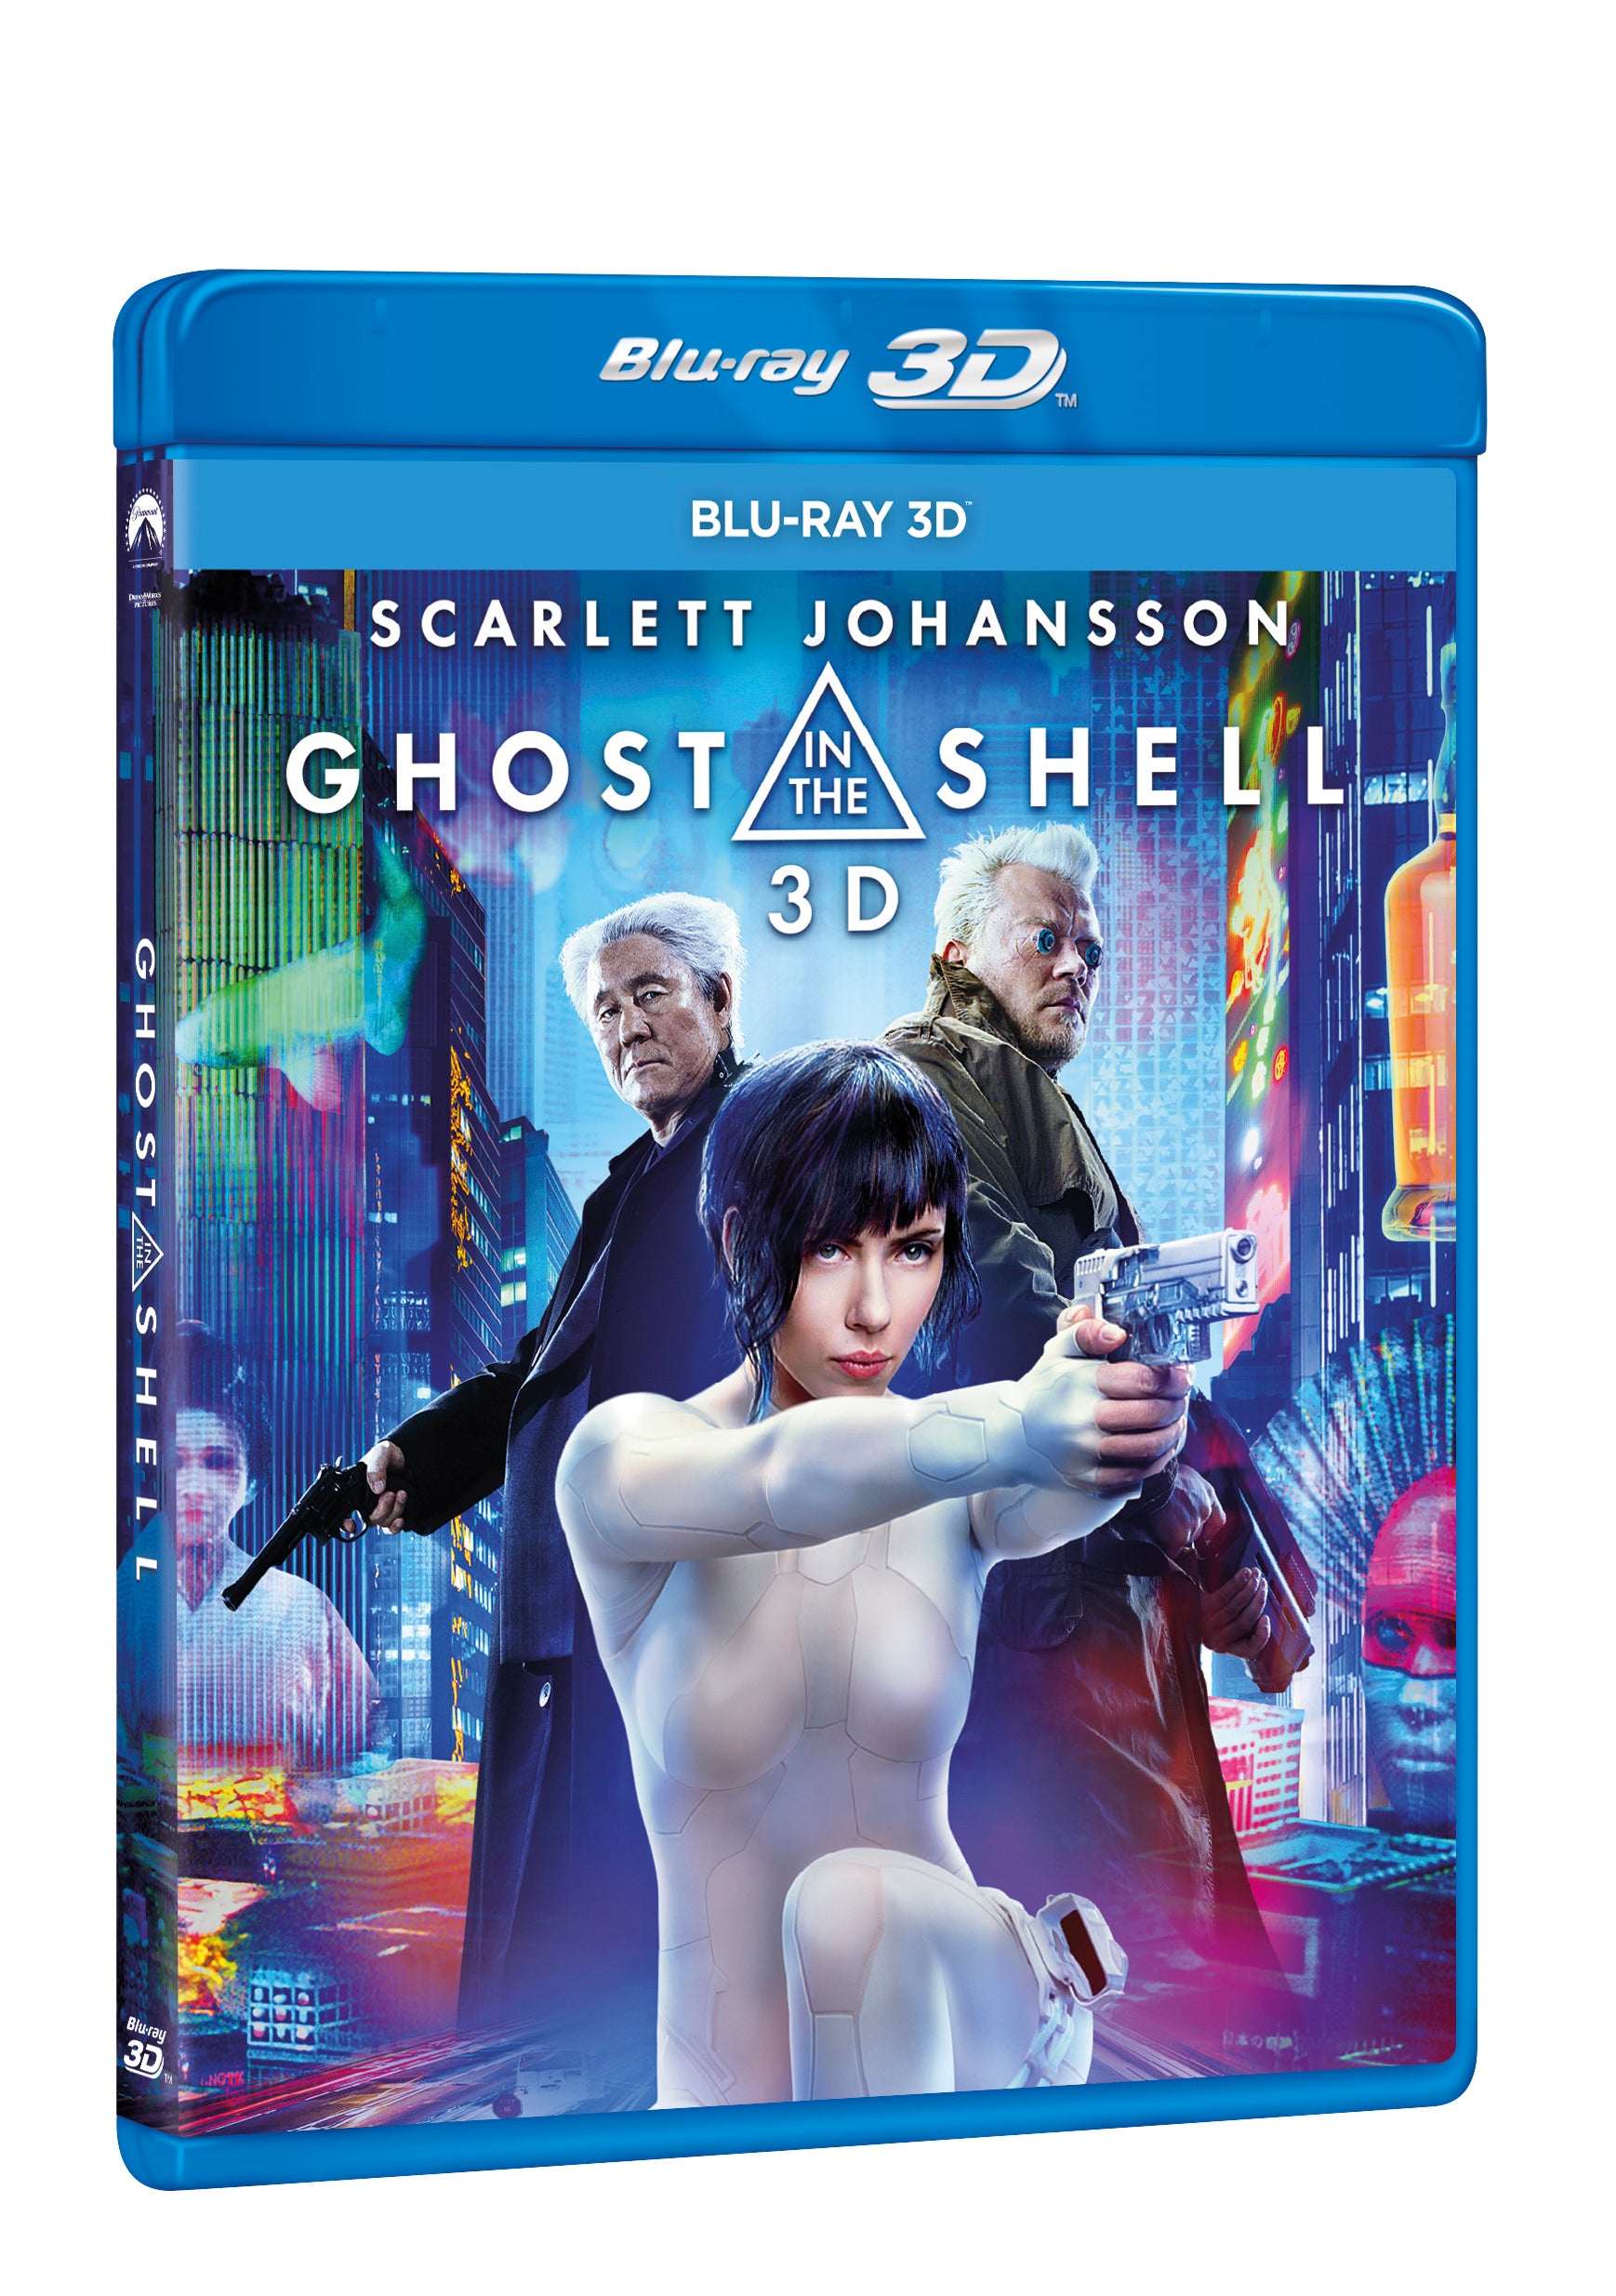 Ghost in the Shell BD (3D) / Ghost in the Shell - Czech version